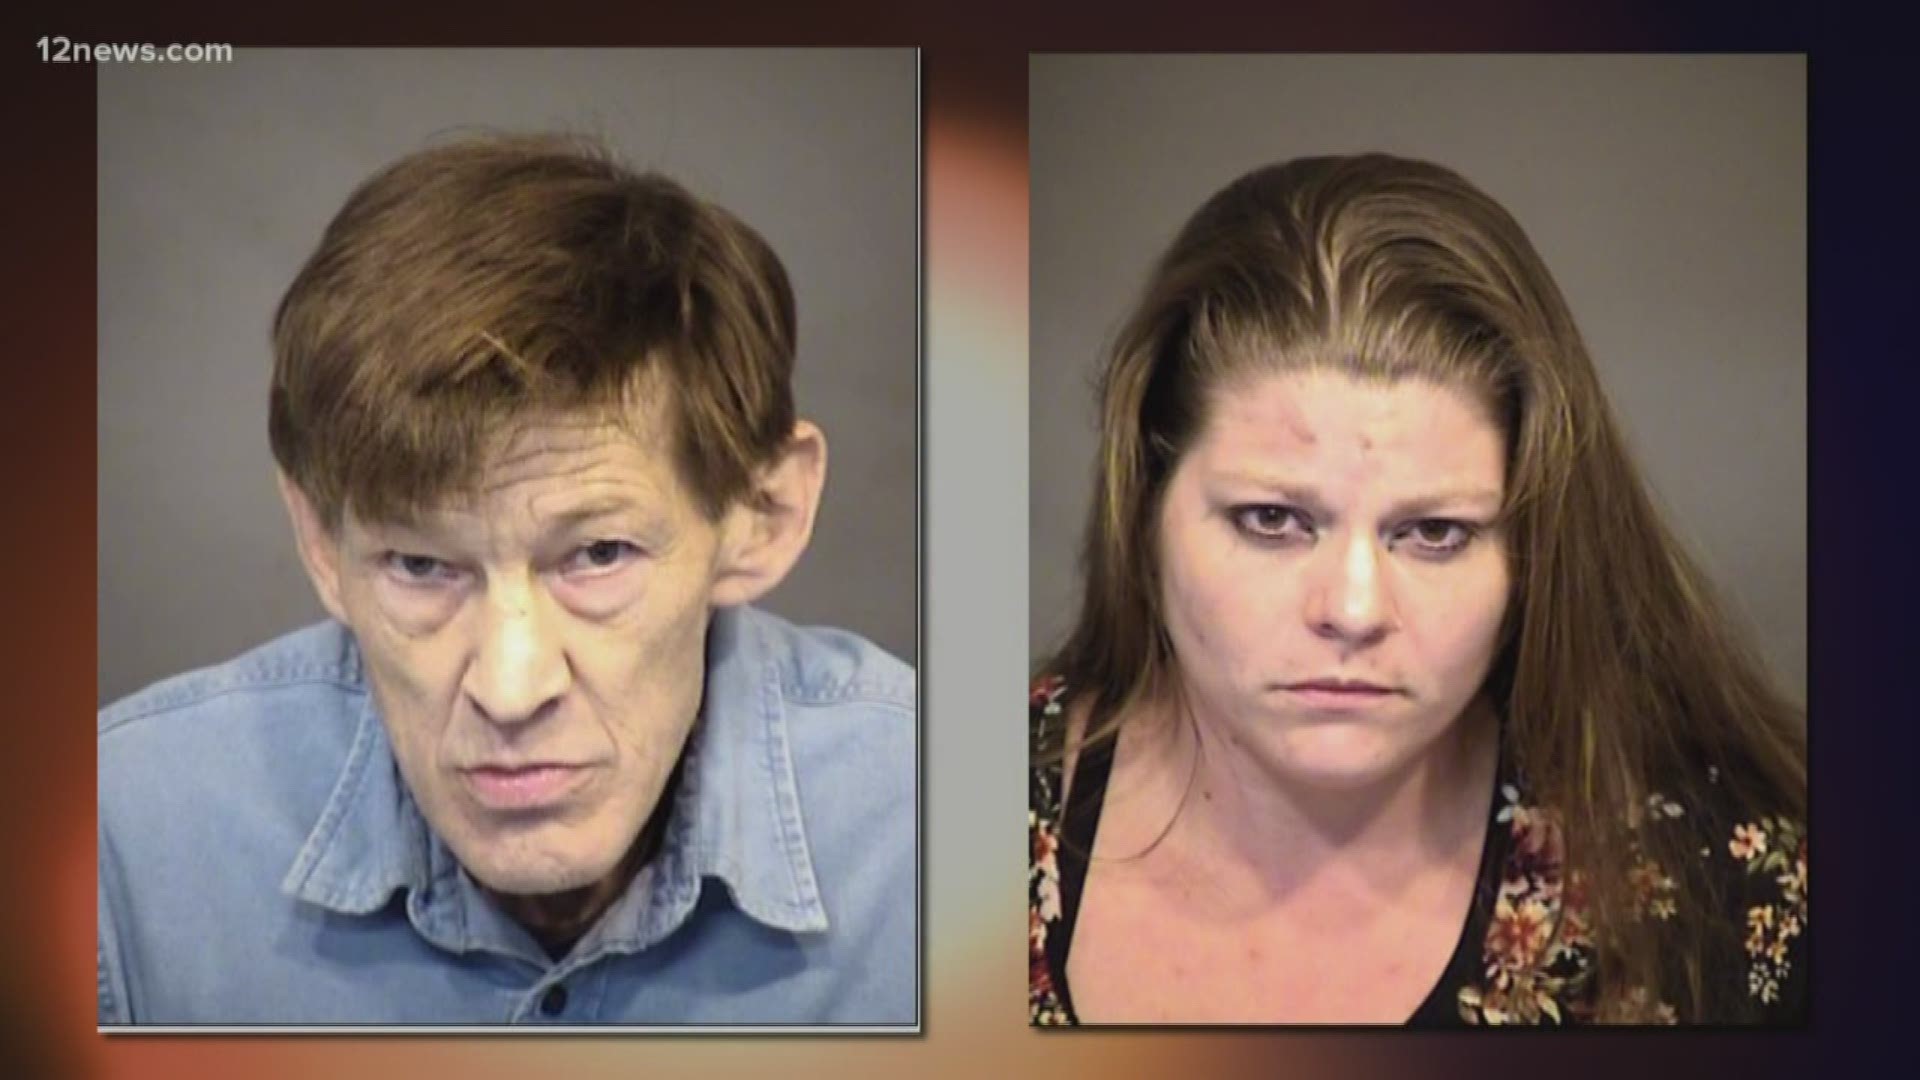 Court documents say the grandfather has been giving his grandson drugs and paying him off for the past year. And that the boy's mother knew about it.